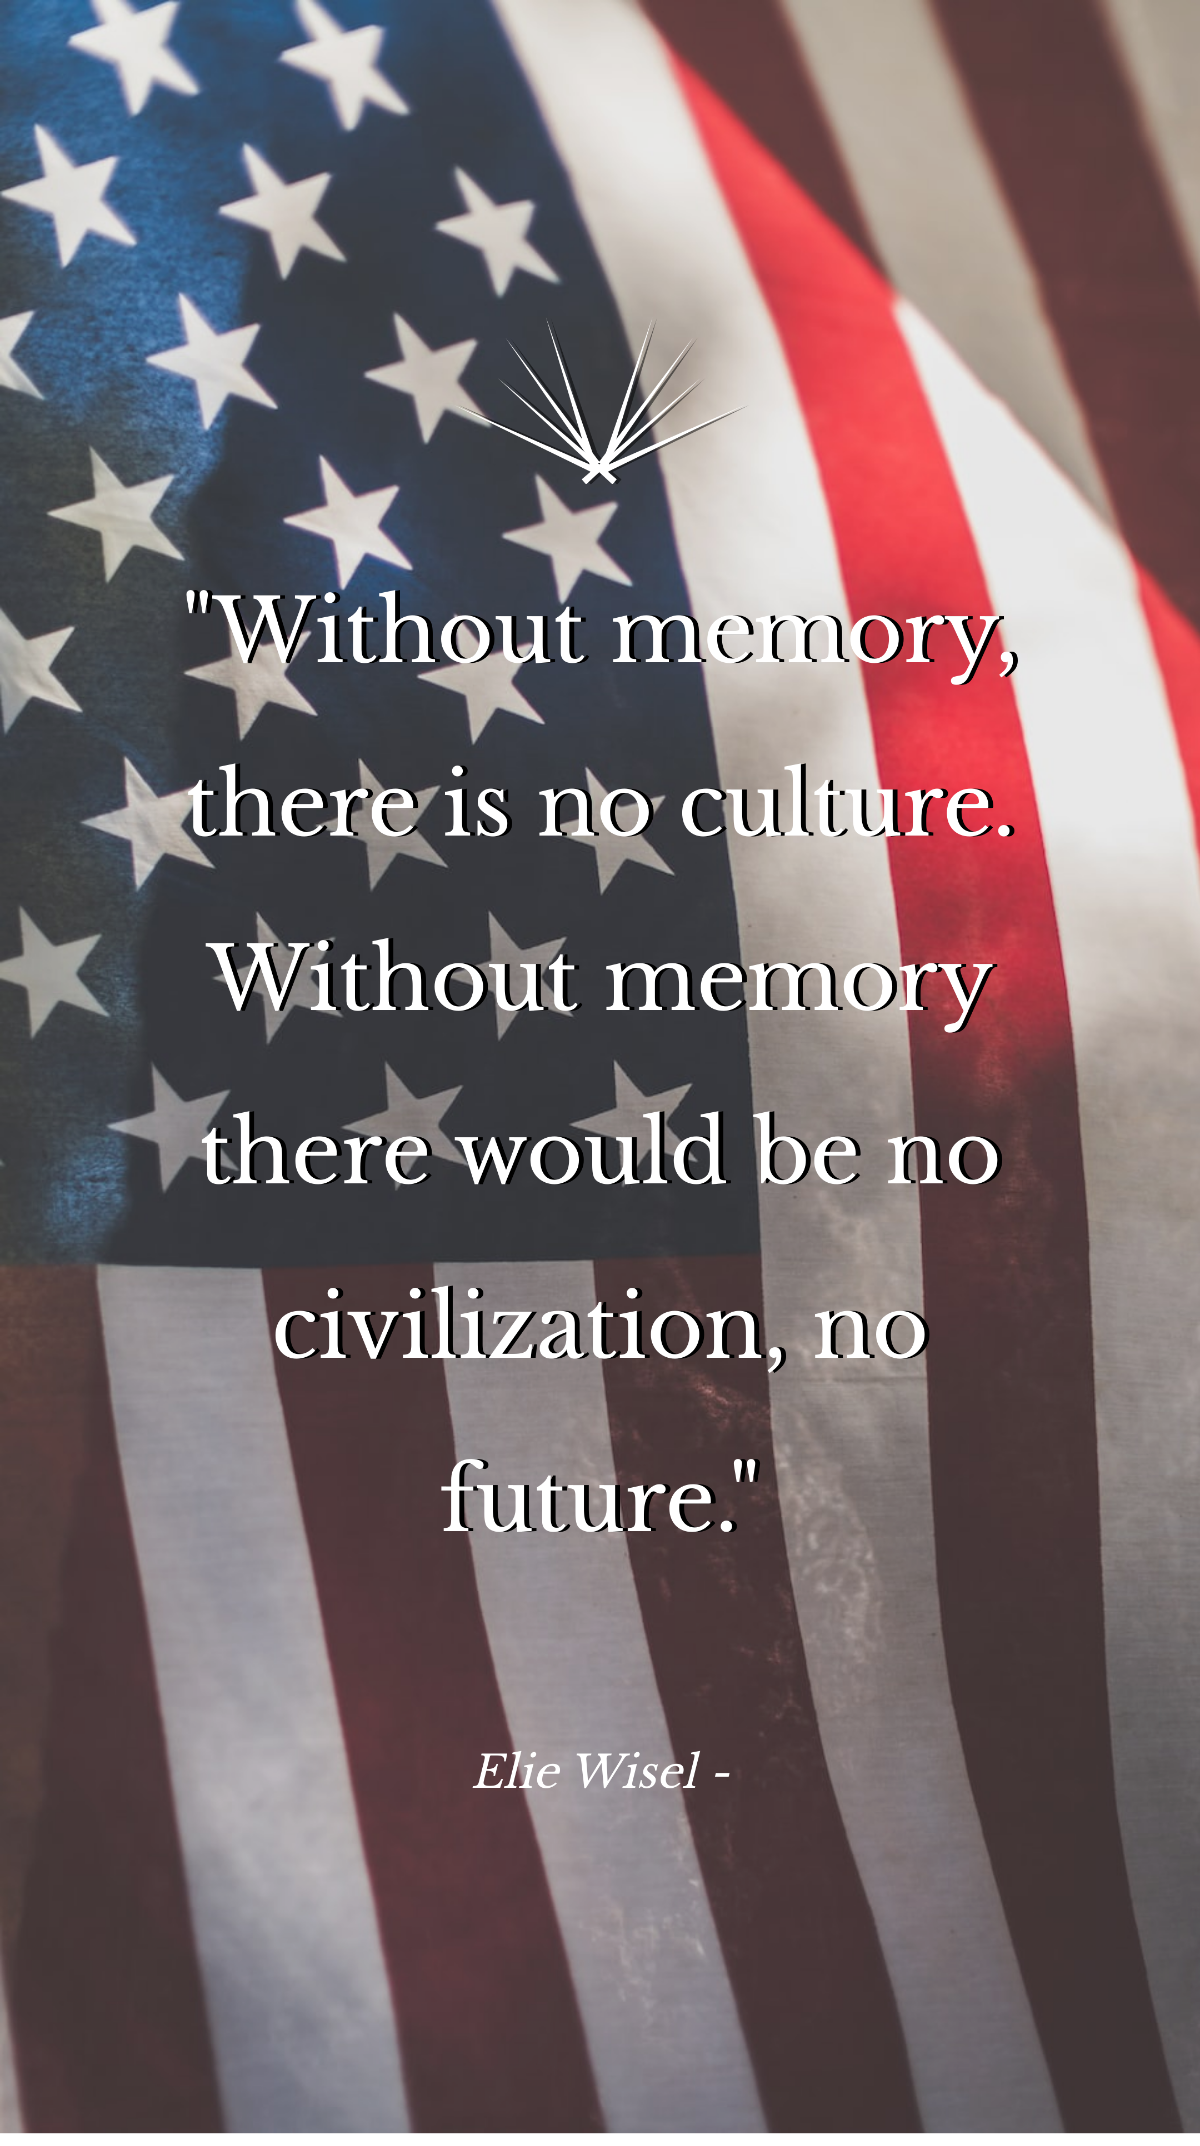 Elie Wisel - Without memory, there is no culture. Without memory there would be no civilization, no future. Template